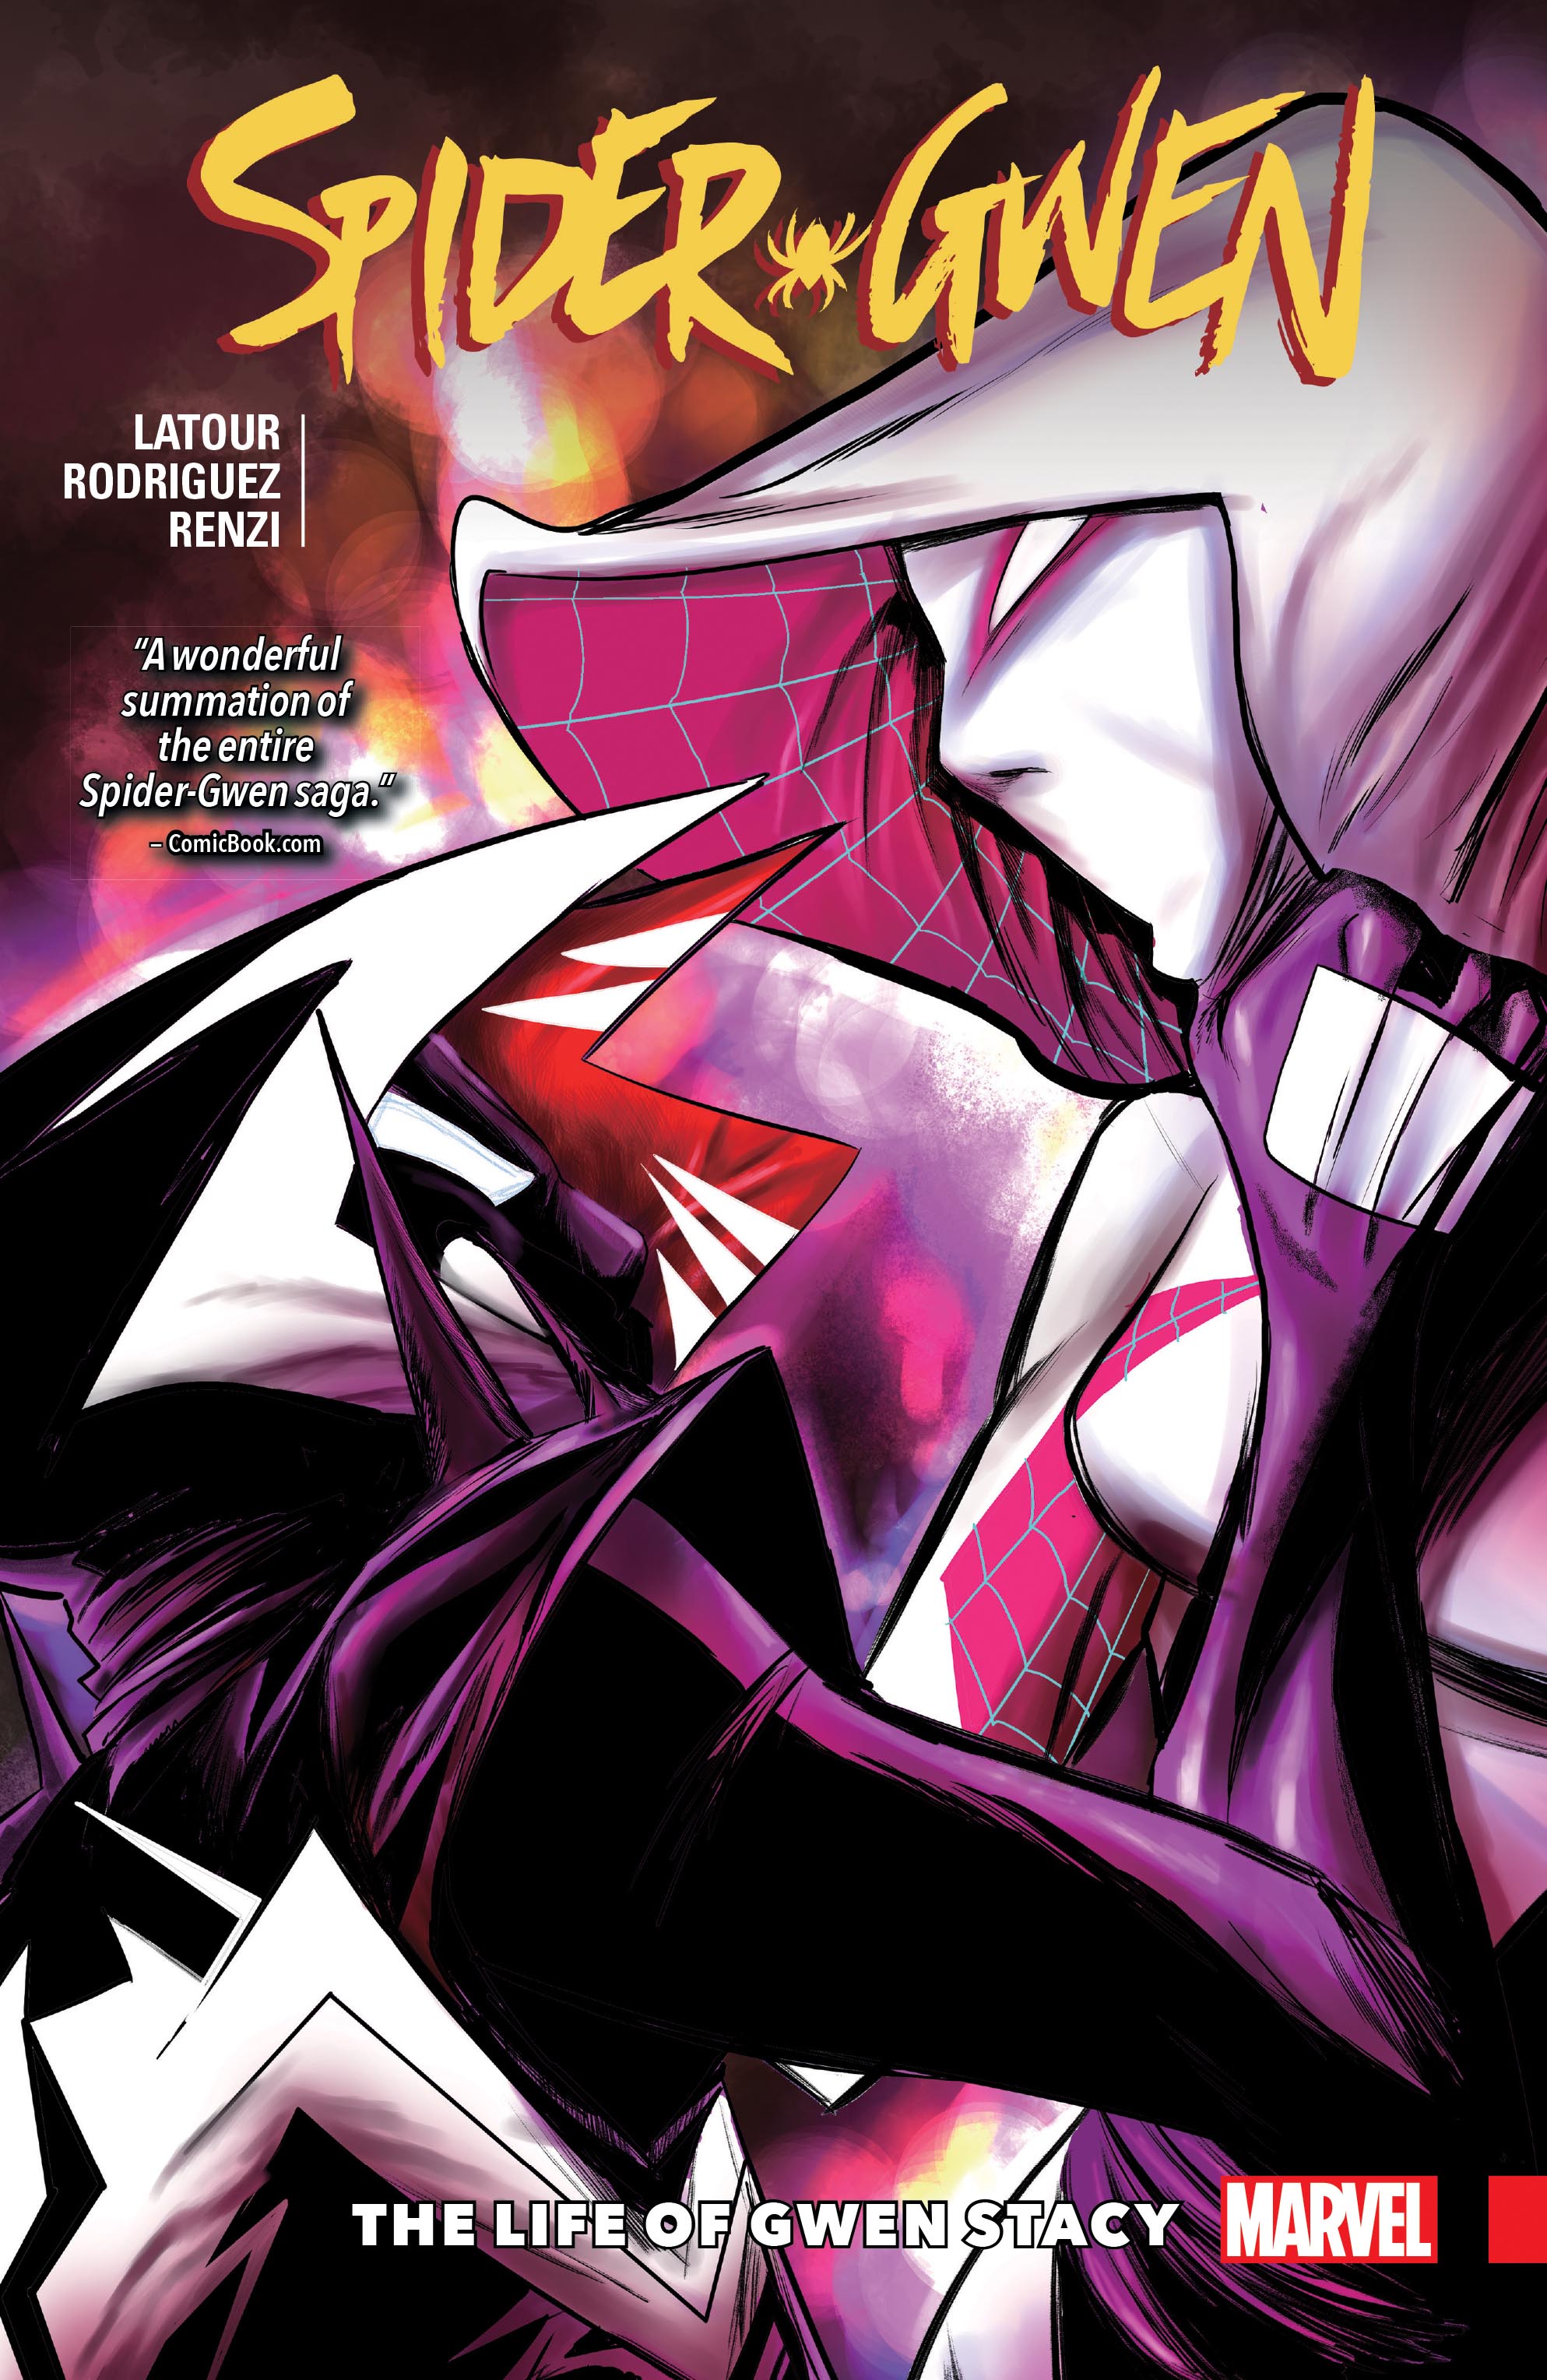 Spider-Gwen Vol. 6: The Life of Gwen Stacy (Trade Paperback)